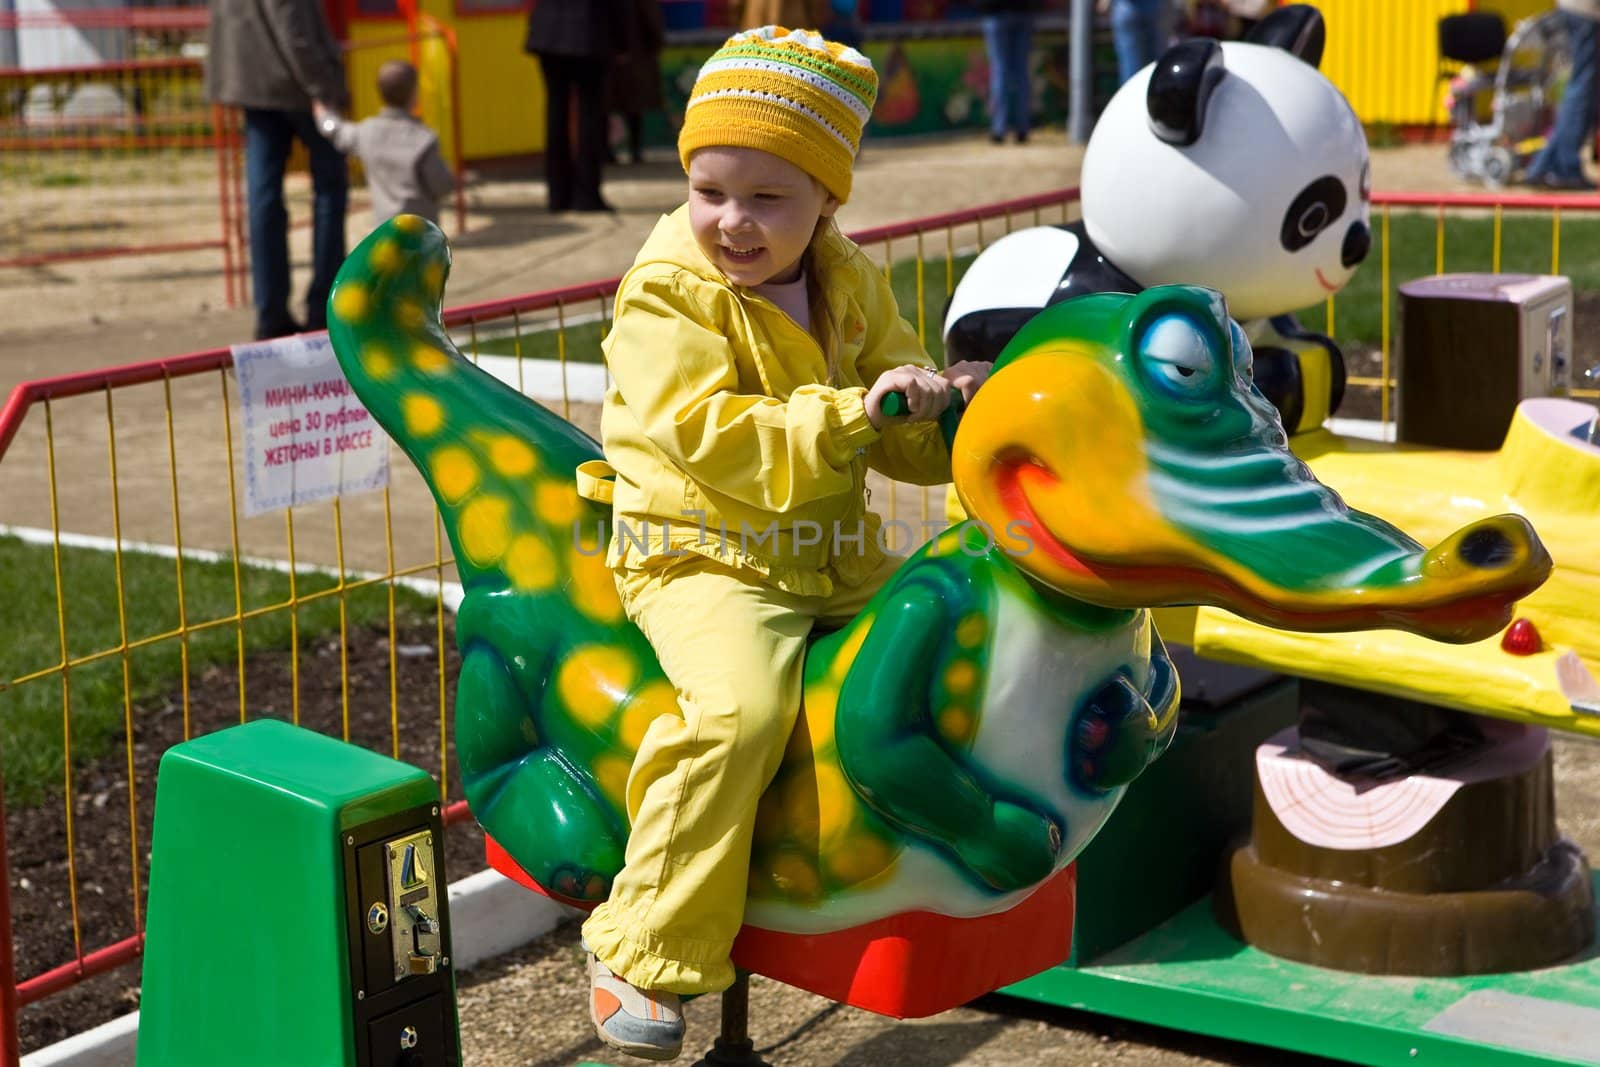 The daughter goes for a drive on the crocodile in park of entertainments